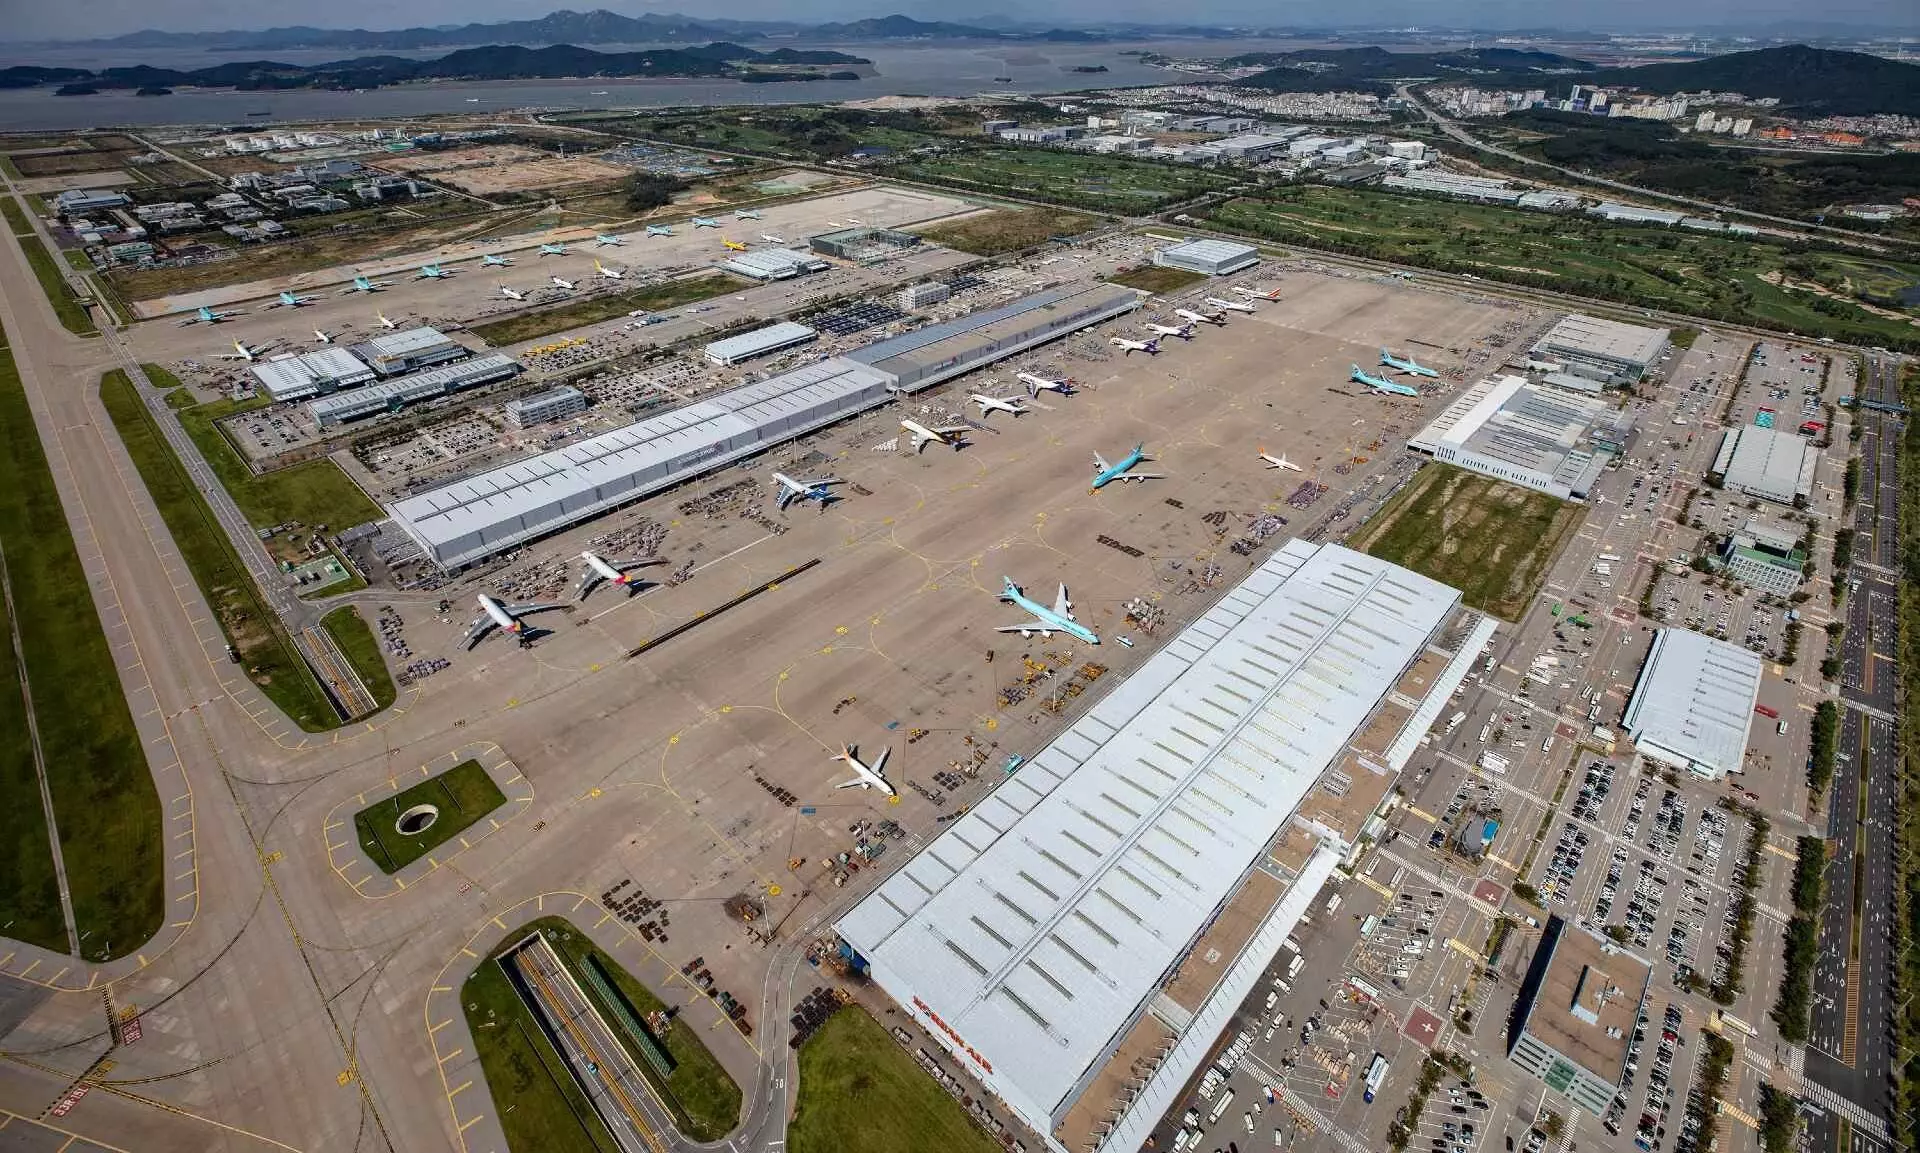 New CEO plans to make Incheon Airport the global logistic hub